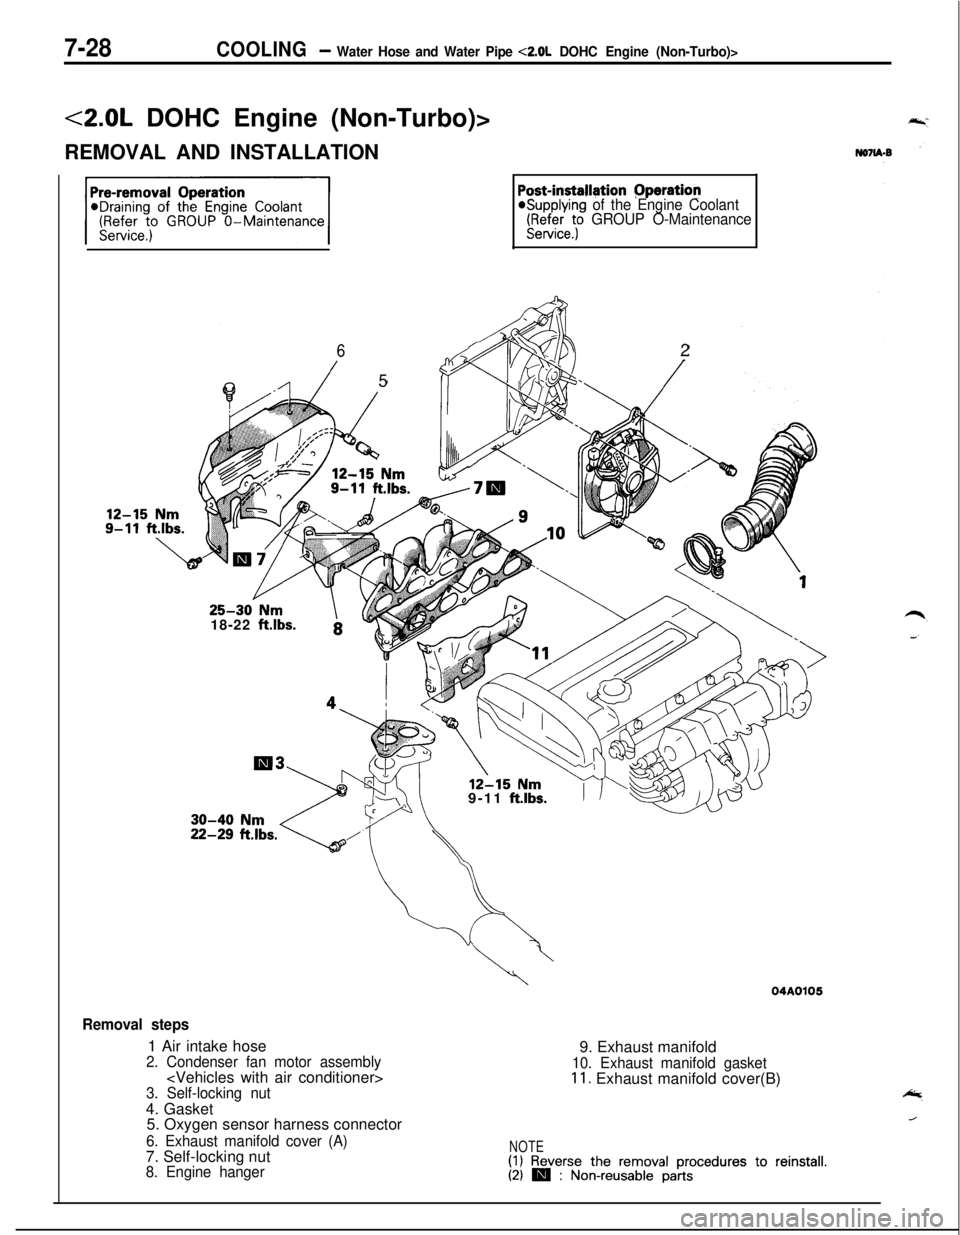 MITSUBISHI ECLIPSE 1991  Service Manual 7-28COOLING- Water Hose and Water Pipe <2.0L DOHC Engine (Non-Turbo)>
<2.0L DOHC Engine (Non-Turbo)>
REMOVAL AND INSTALLATION
Post-installgtion Pperation@Supplying of the Engine Coolant(FF$efeet; GROU